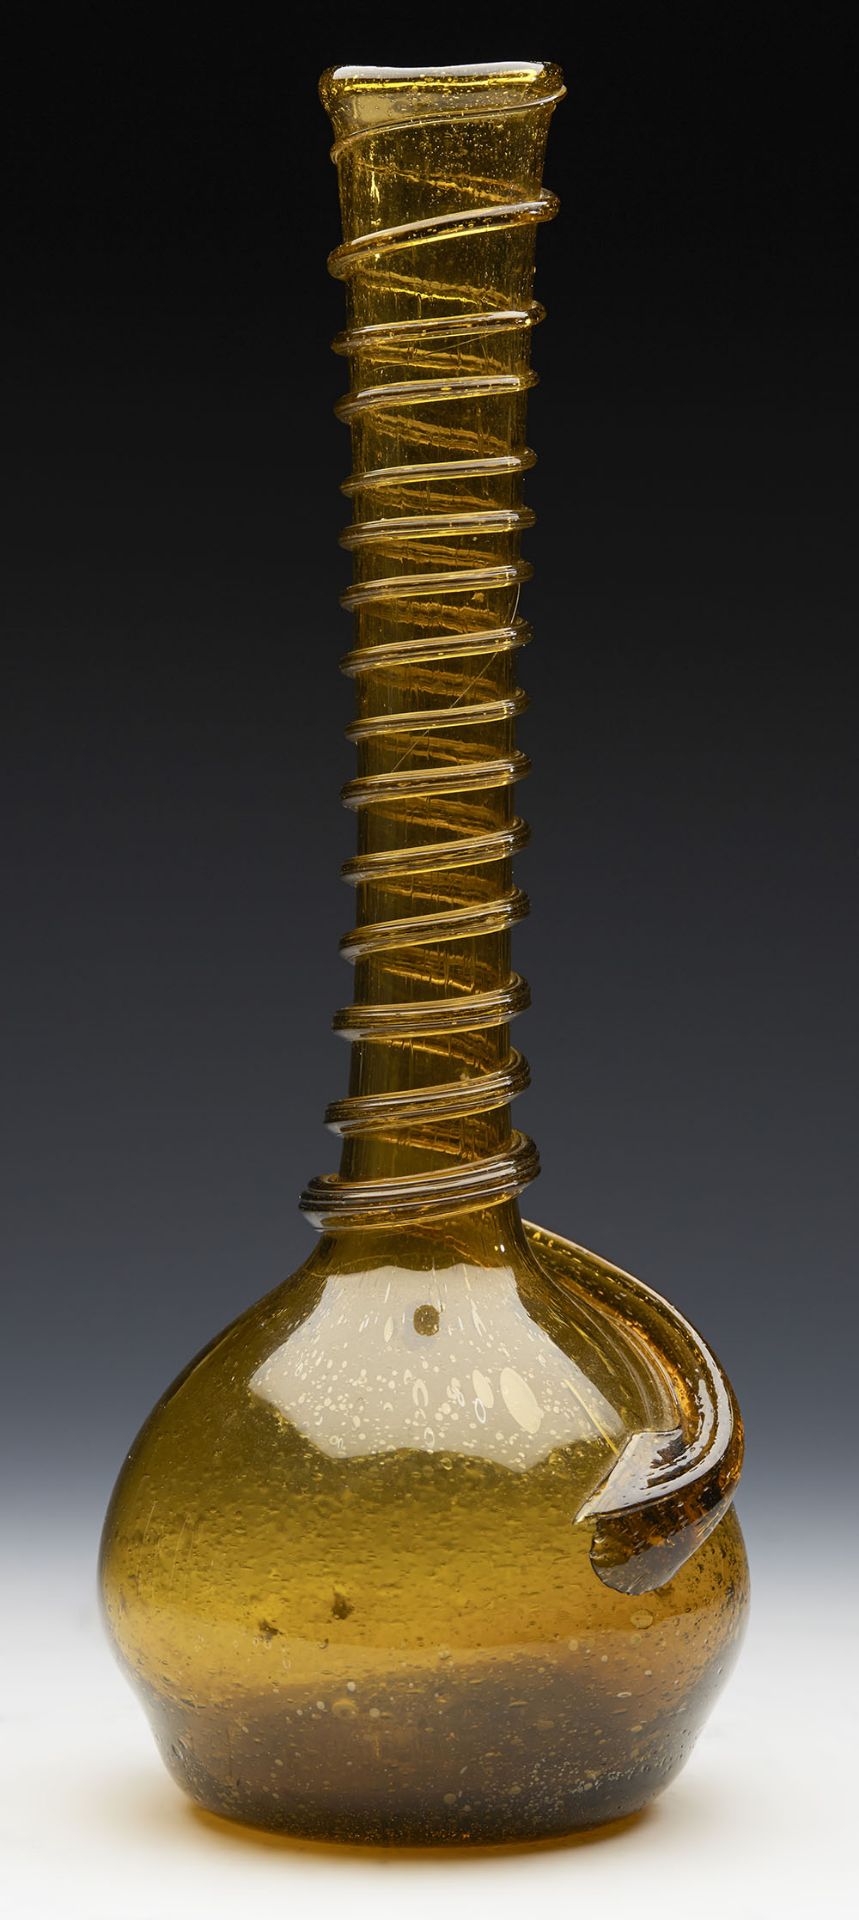 Antique Persian Style Bottle Vase With Coiled Snake 19Th C. - Image 3 of 9